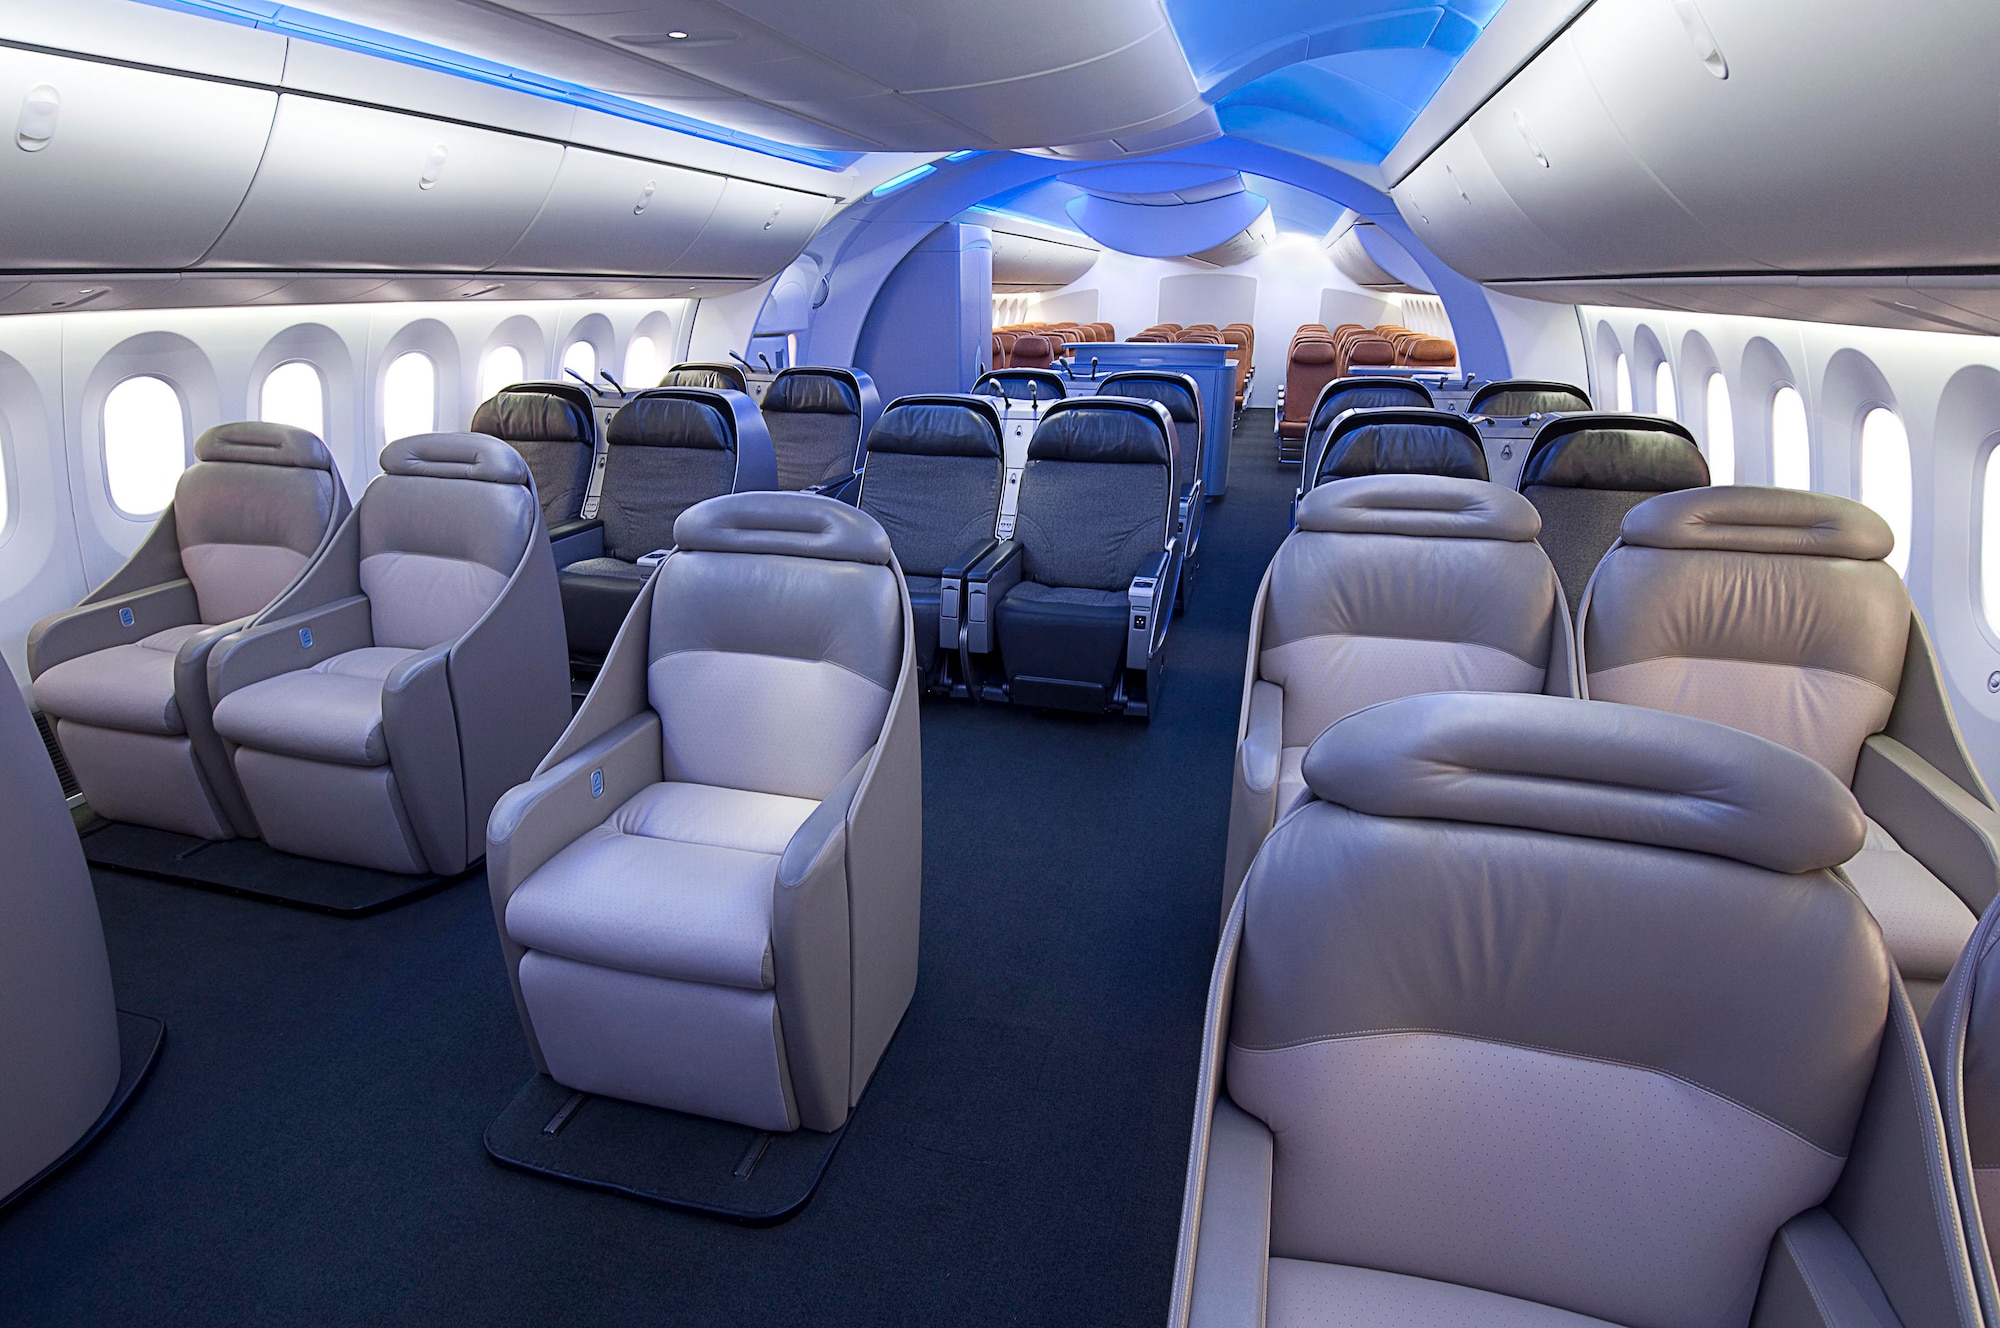 It is said to offer greater passenger comfort with higher cabin humidity, wider cabins and aisles, larger windows, and bigger overhead luggage bins than competing midsize jetliners.